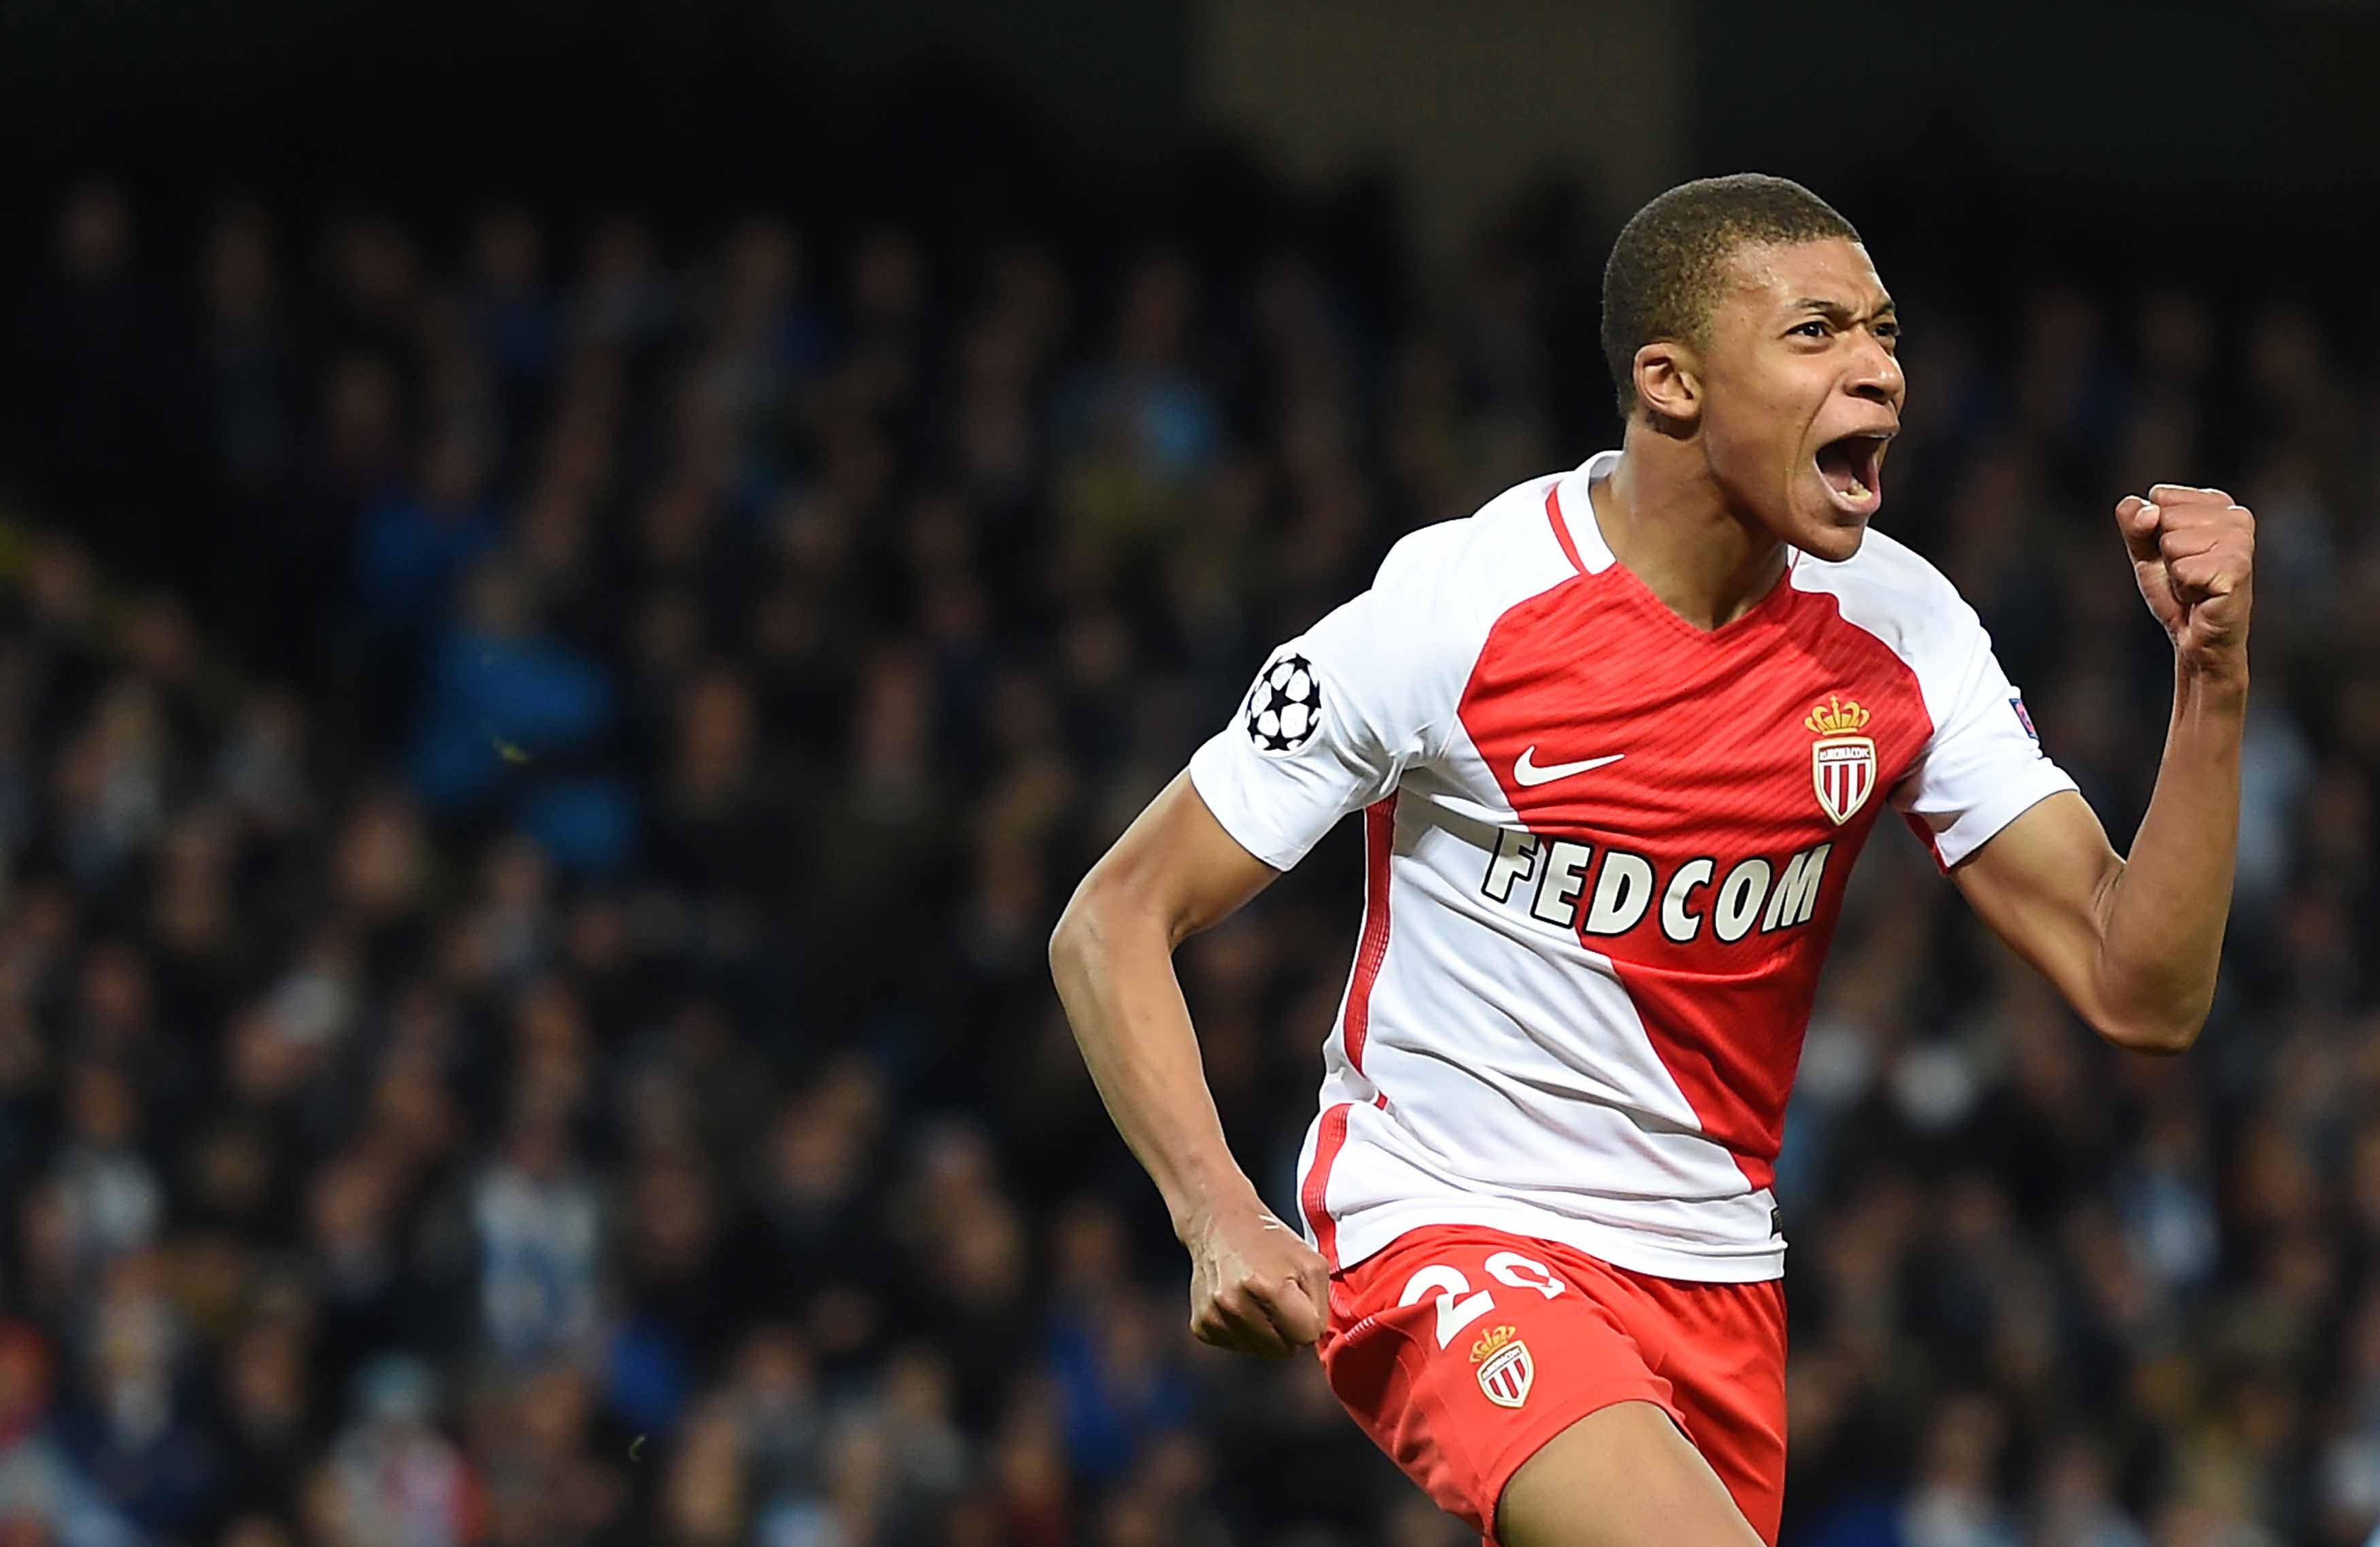 French Teenager And Football Sensation Kylian Mbappé Joins PSG From Monaco